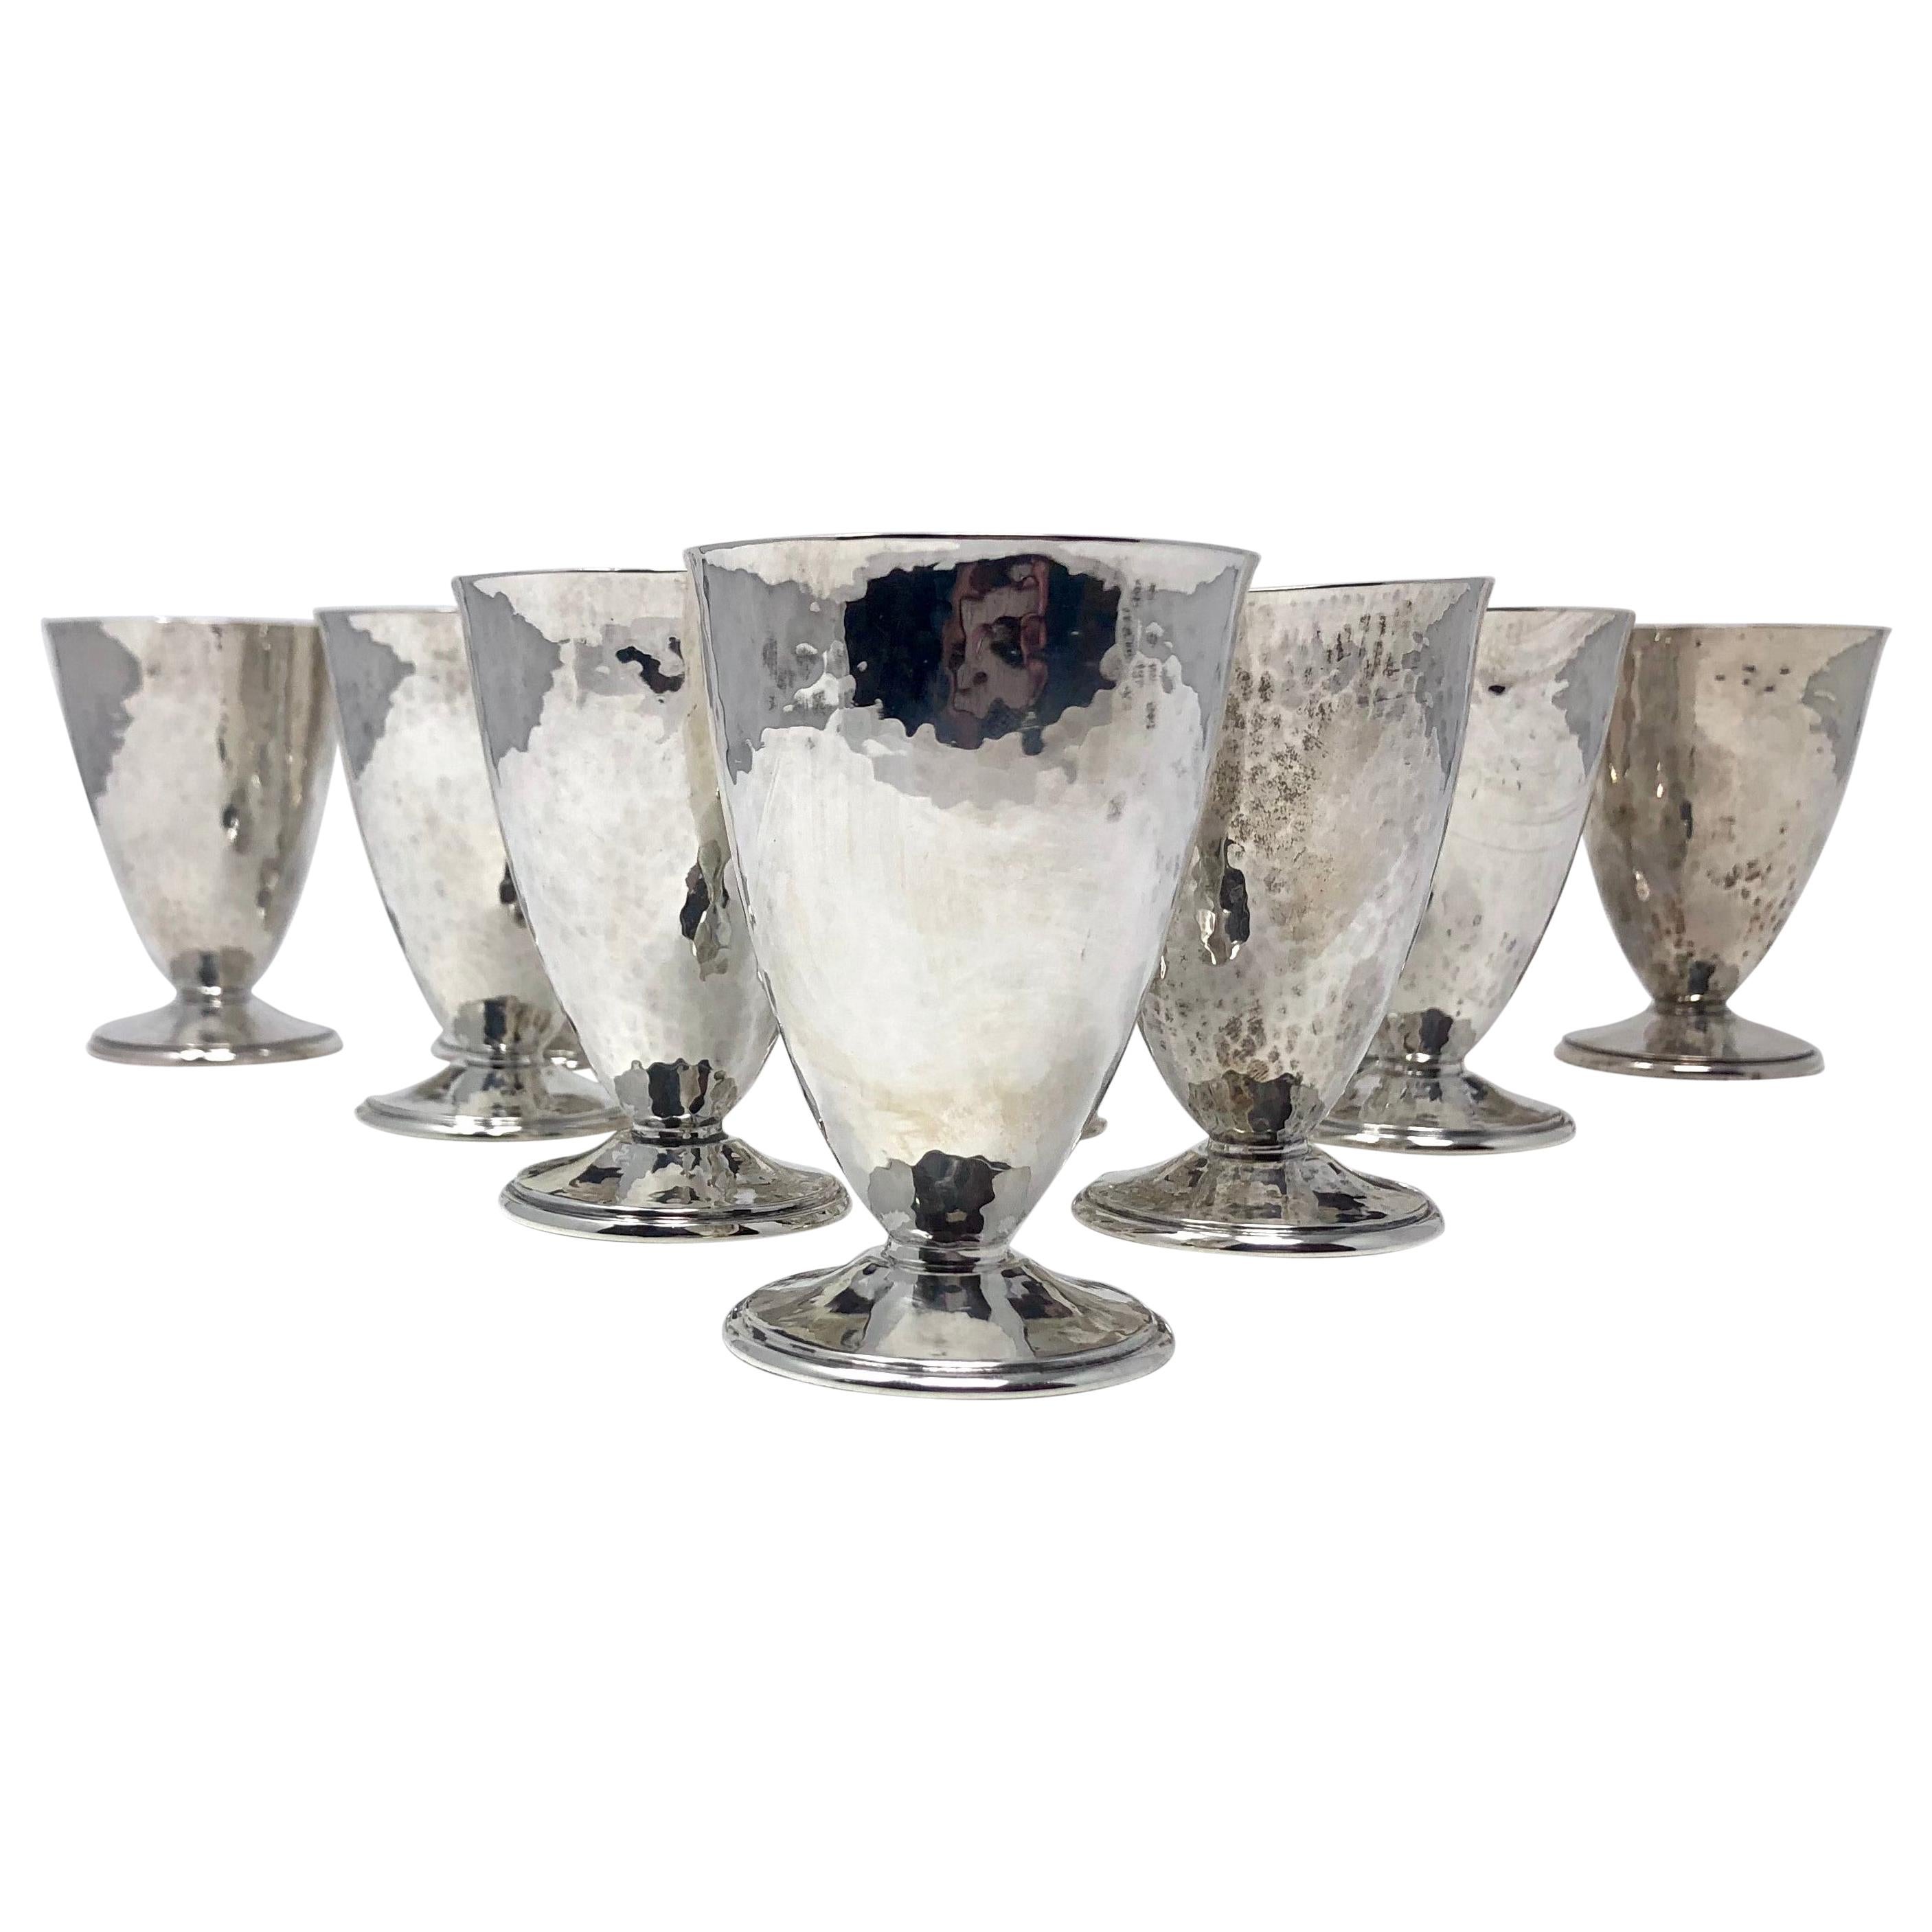 Set of 12 Antique Sterling Silver Hammered Cordial Glasses by Barbour Silver Co.